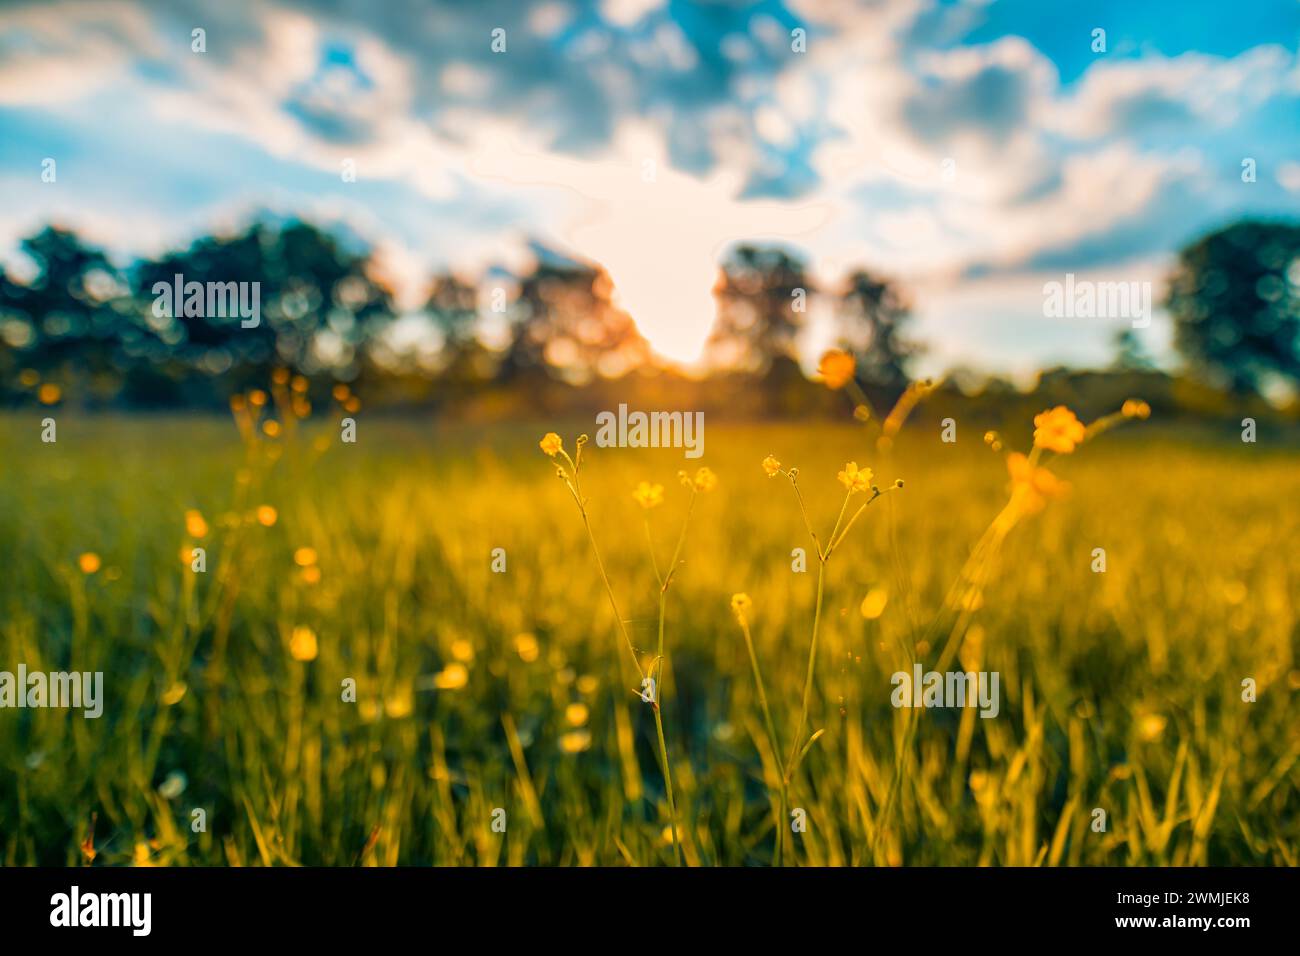 Abstract sunset field landscape of yellow flowers and grass meadow on warm golden hour sunset or sunrise. Tranquil spring summer nature closeup blur Stock Photo